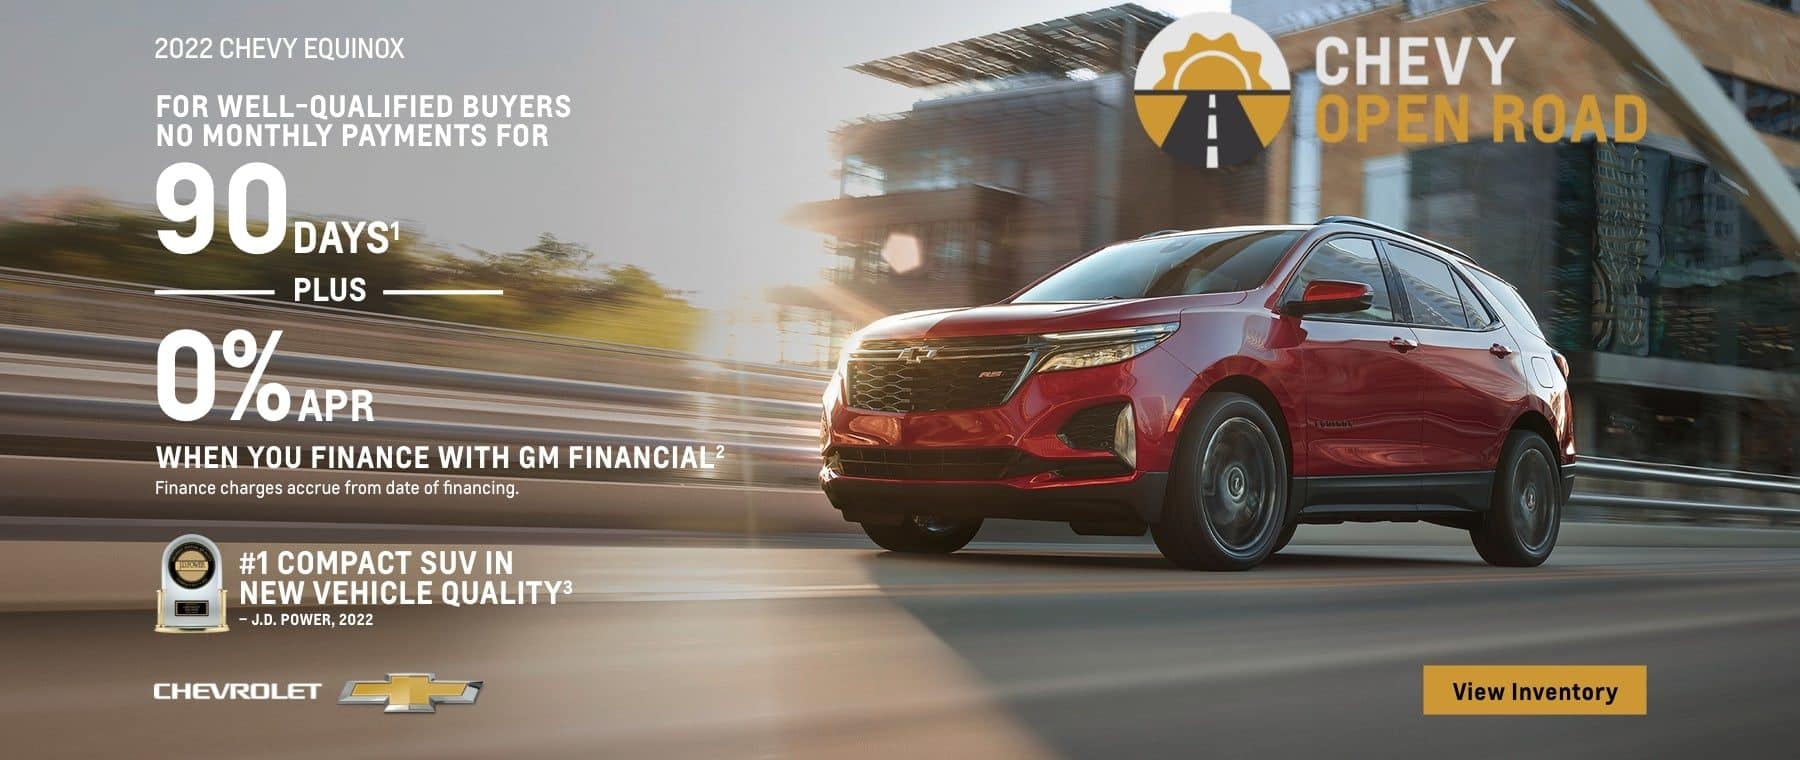 2022 Chevy Equinox. Chevy Open Road. For well-qualified buyers. No monthly payments for 90 days. Plus, 0% APR when you finance with GM Financial. Finance charges accrue from date of financing.